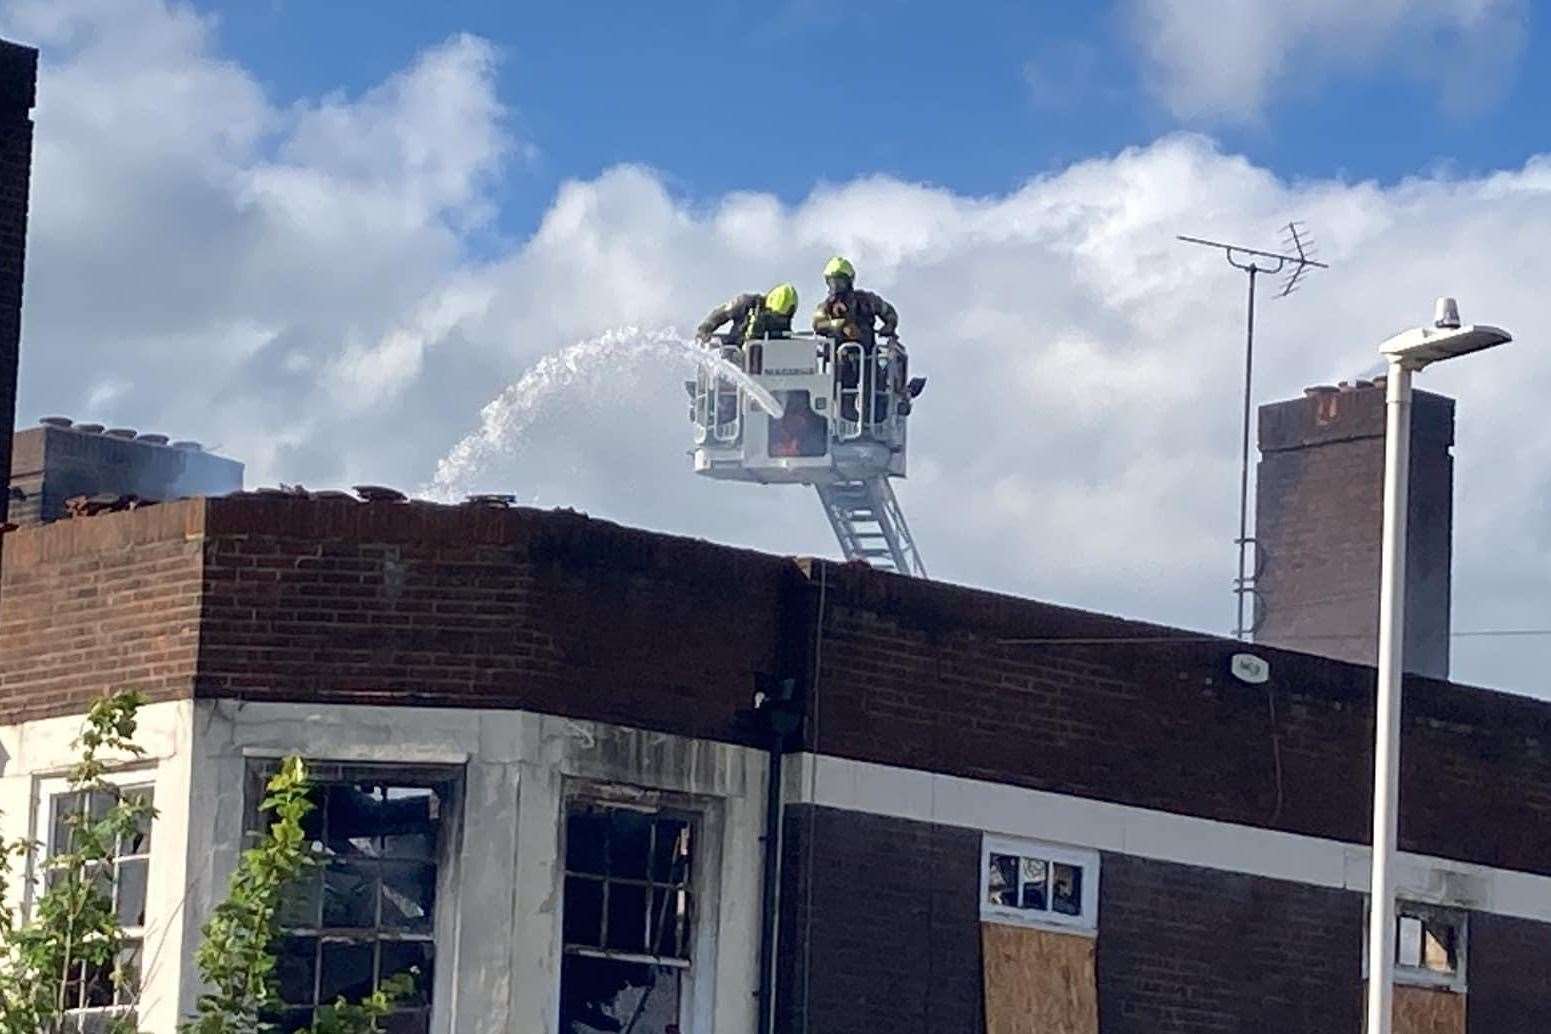 Firefighters put out a fire at the former Nore pub in St George's Avenue, Sheerness. Photo: John Nurden